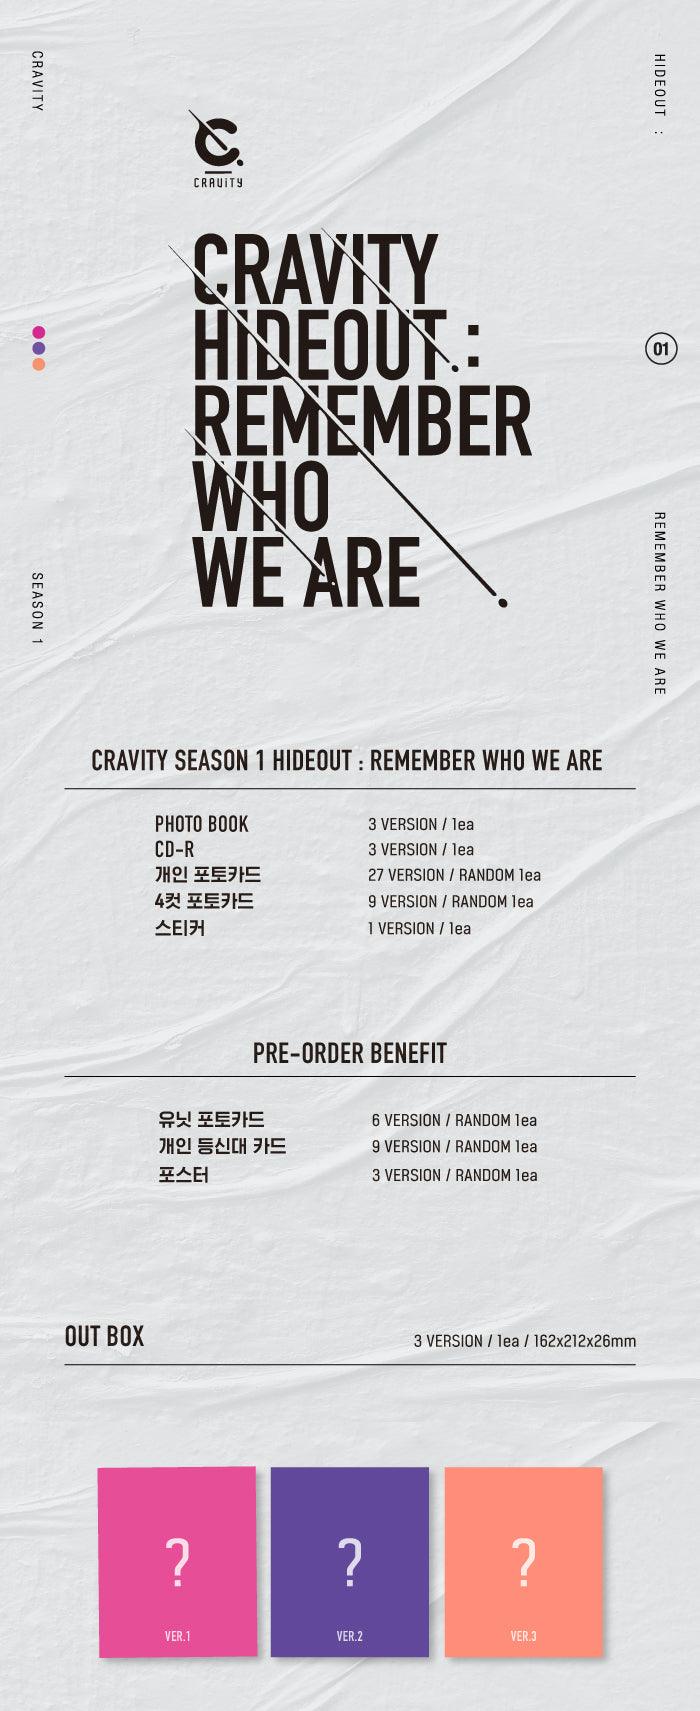 Cravity - Cravity Season 1: Hideout - Remember Who We Are - J-Store Online